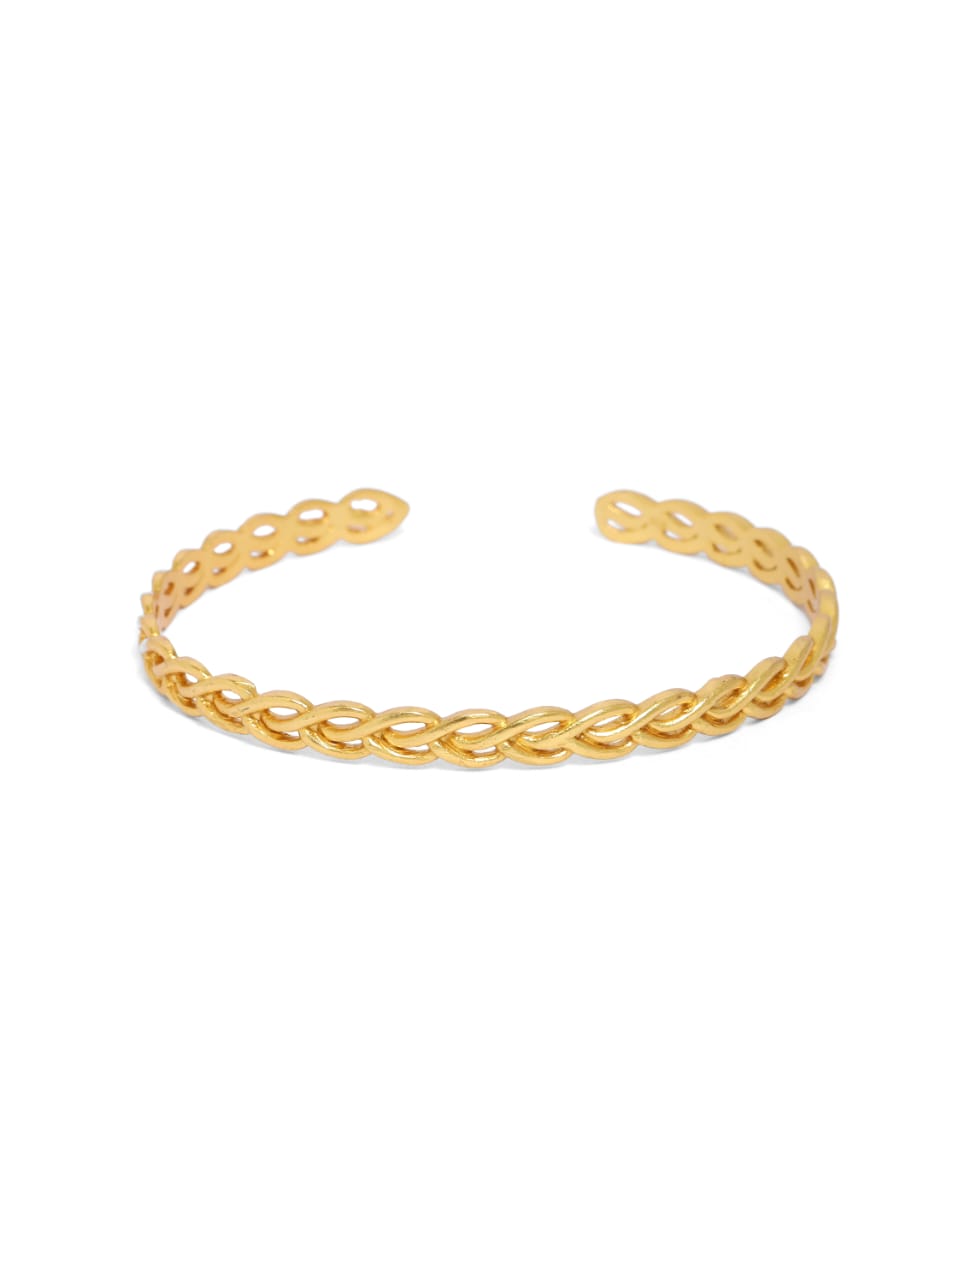 Classic rope style hand knotted bracelet in 92.5 Sterling Silver with micron gold plating in adjustable size.